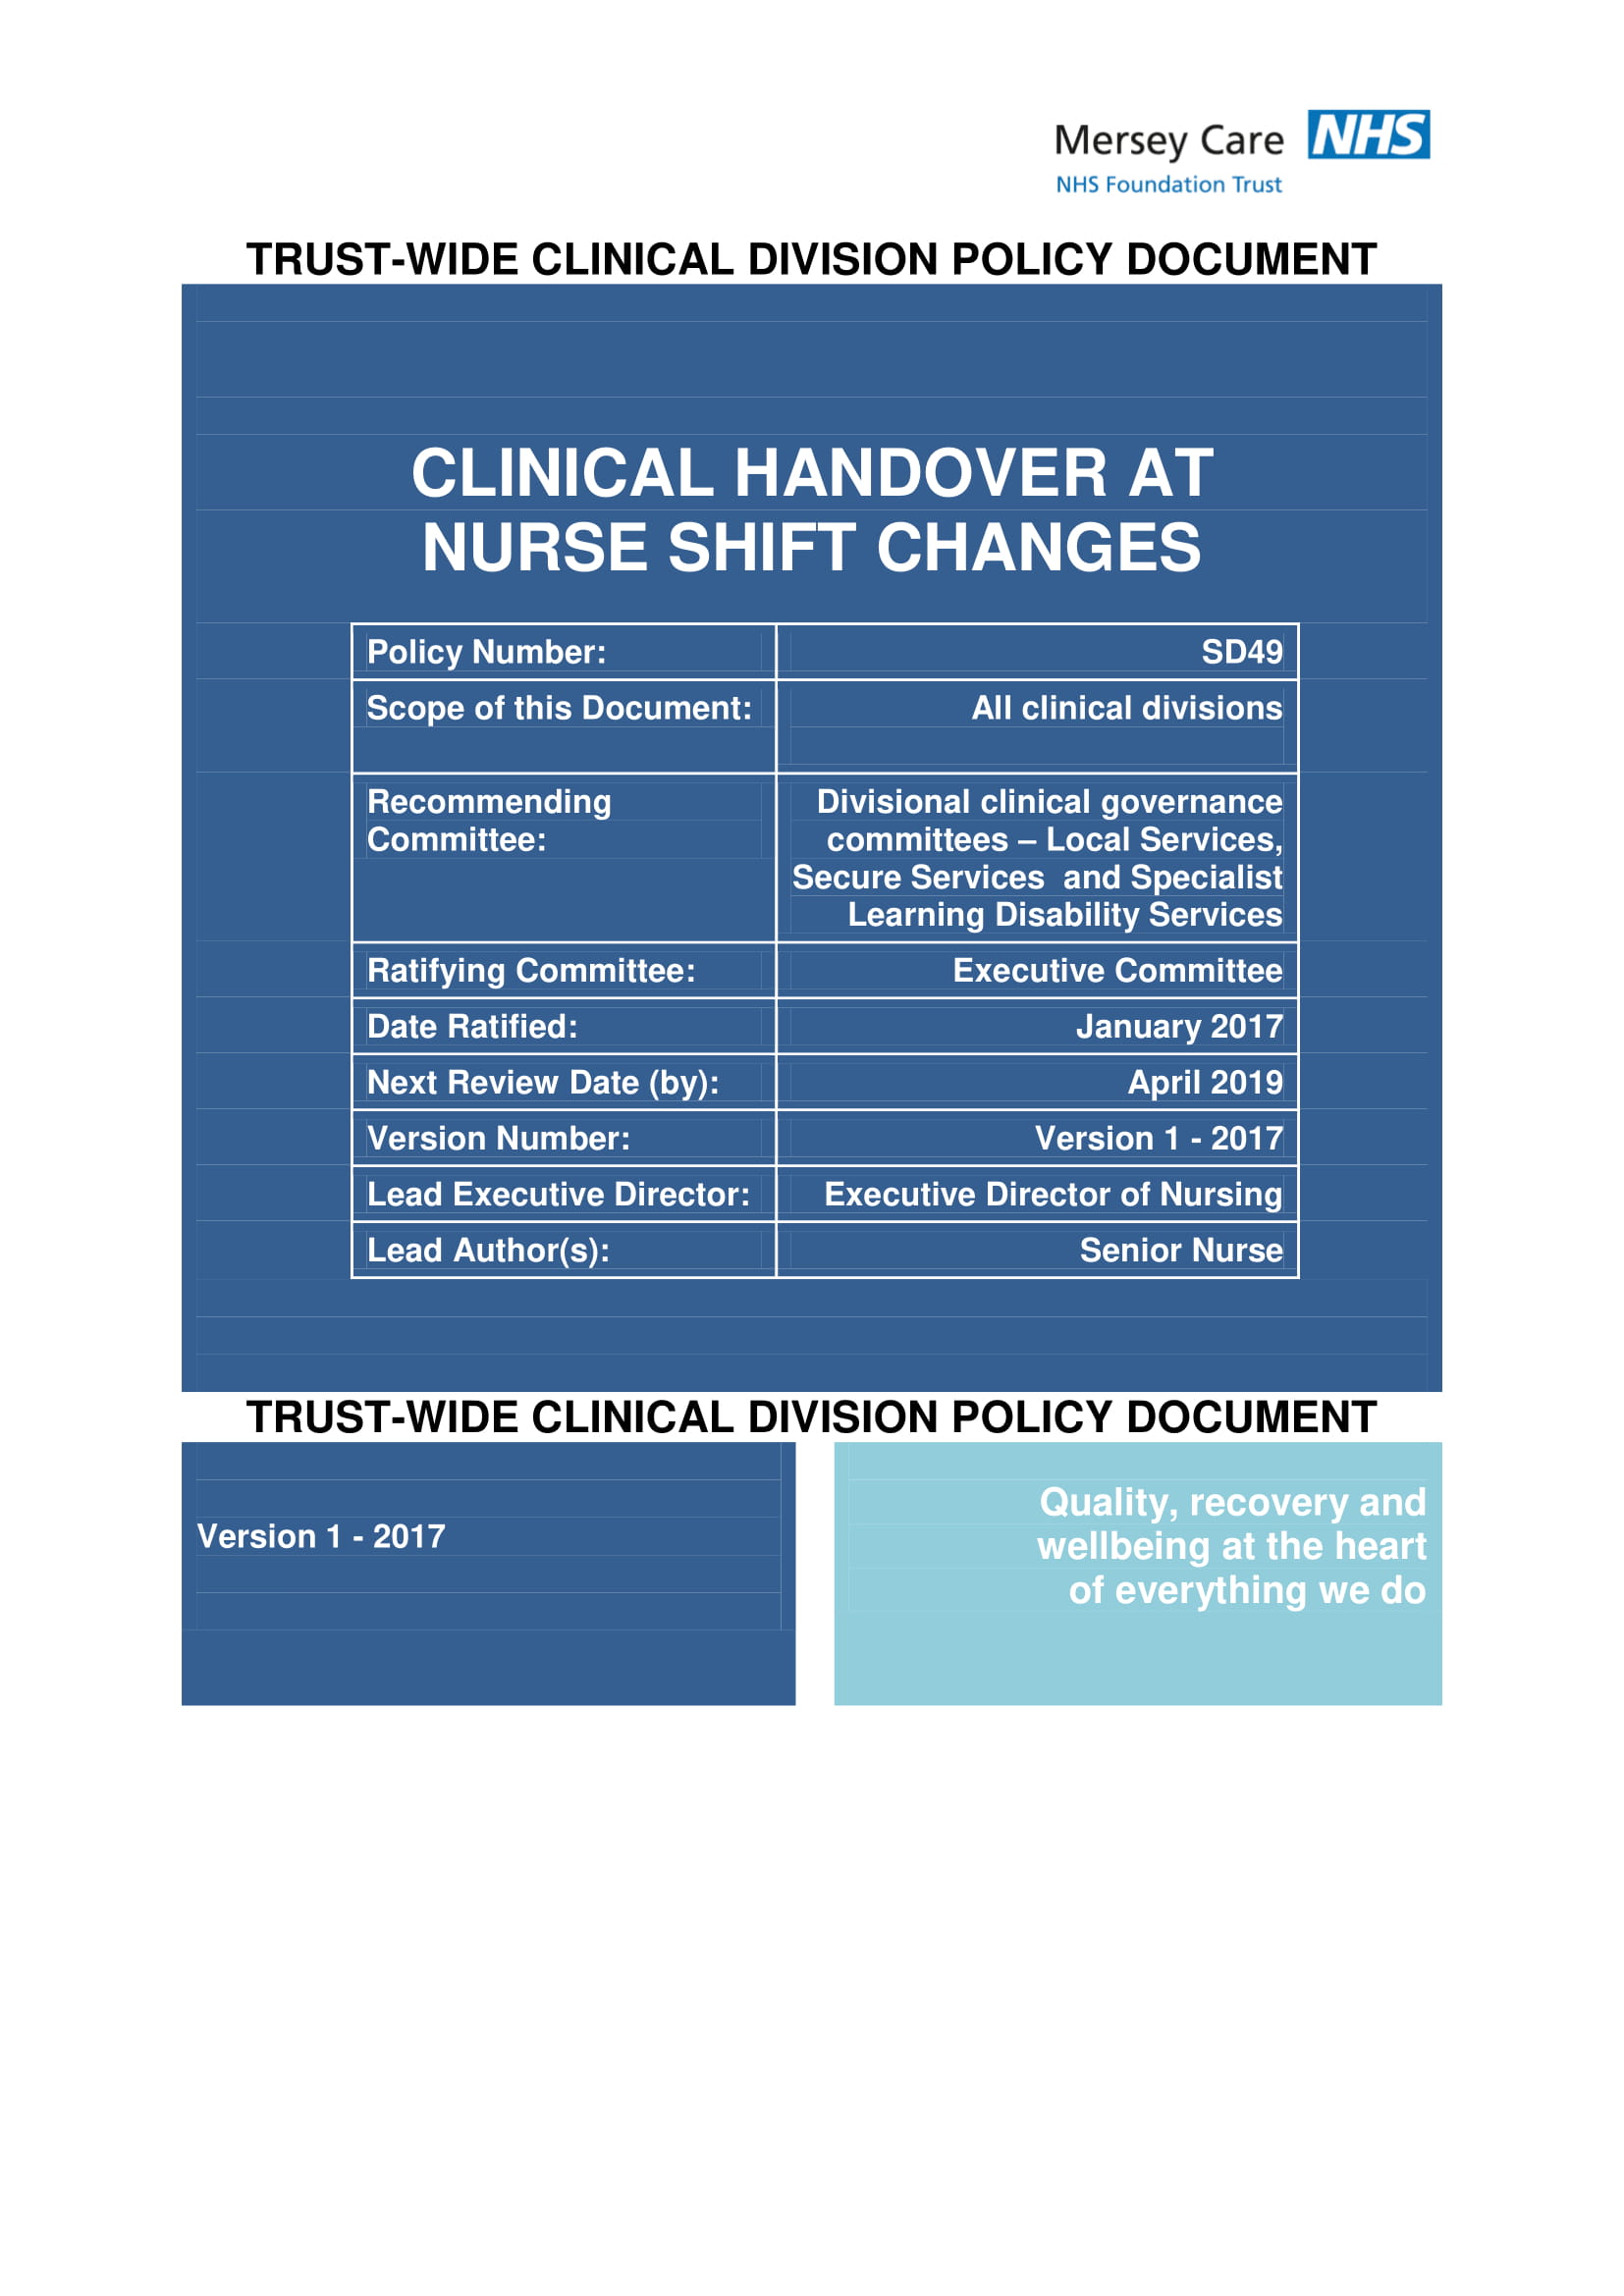 Clinical Handover Report at Nurse Shift Changes Example 01